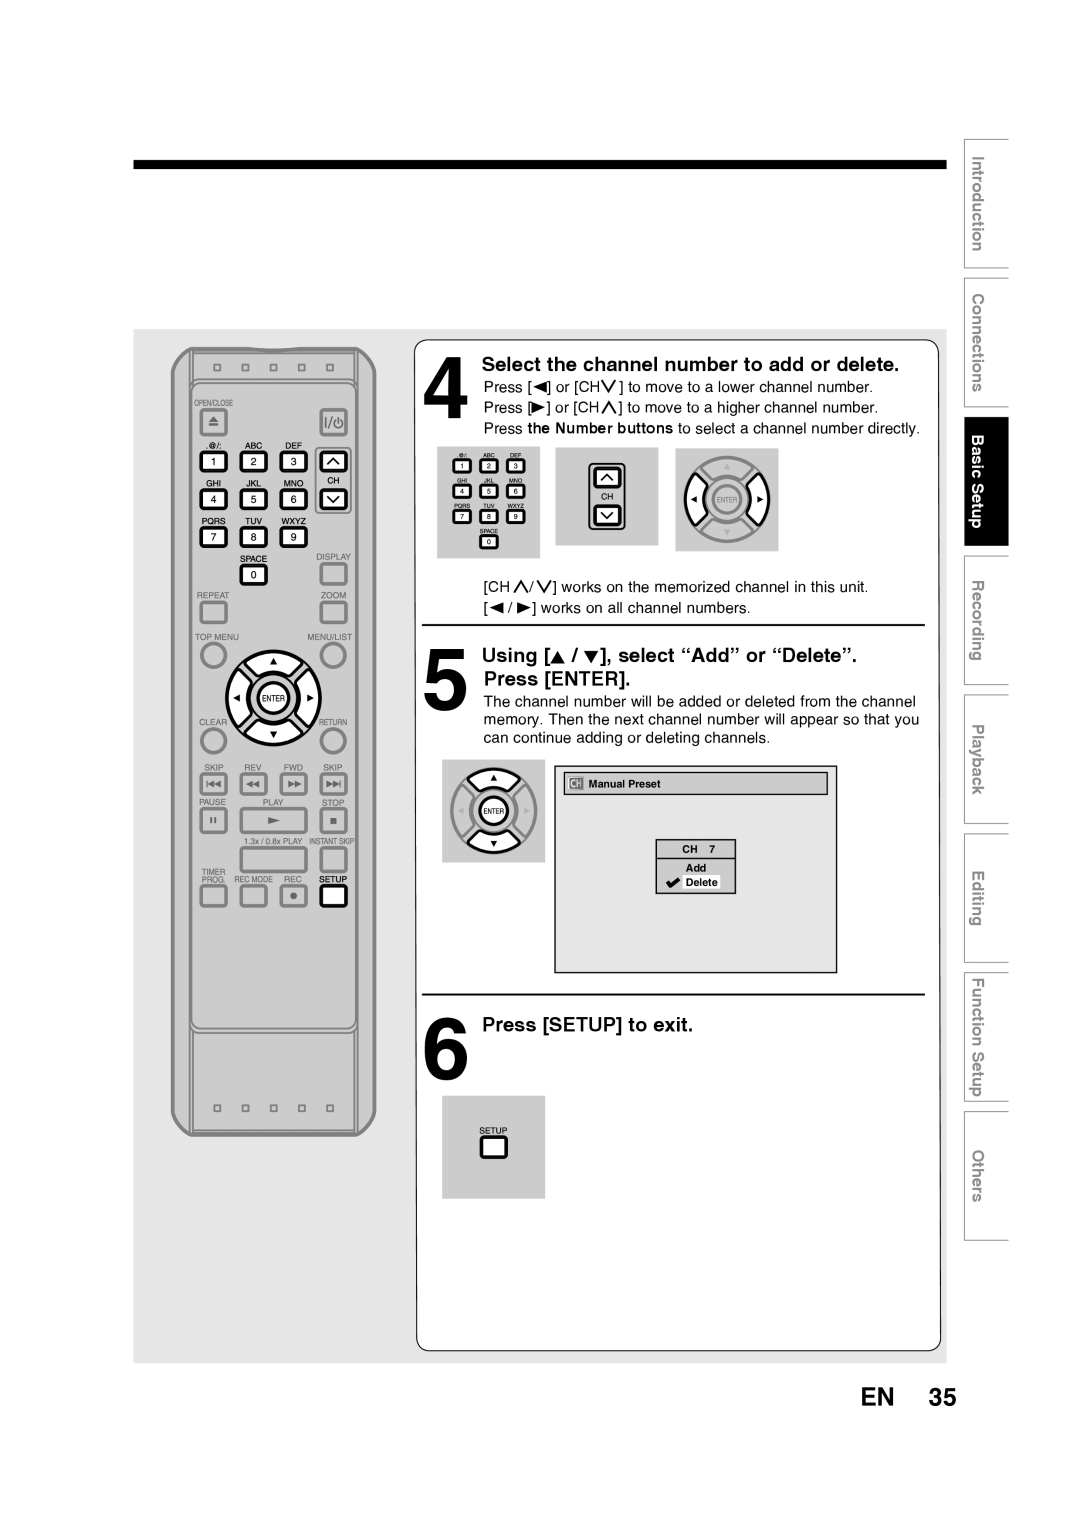 Toshiba D-RW2SU/D-RW2SC Select the channel number to add or delete, Using K / L, select “Add” or “Delete” Press ENTER 